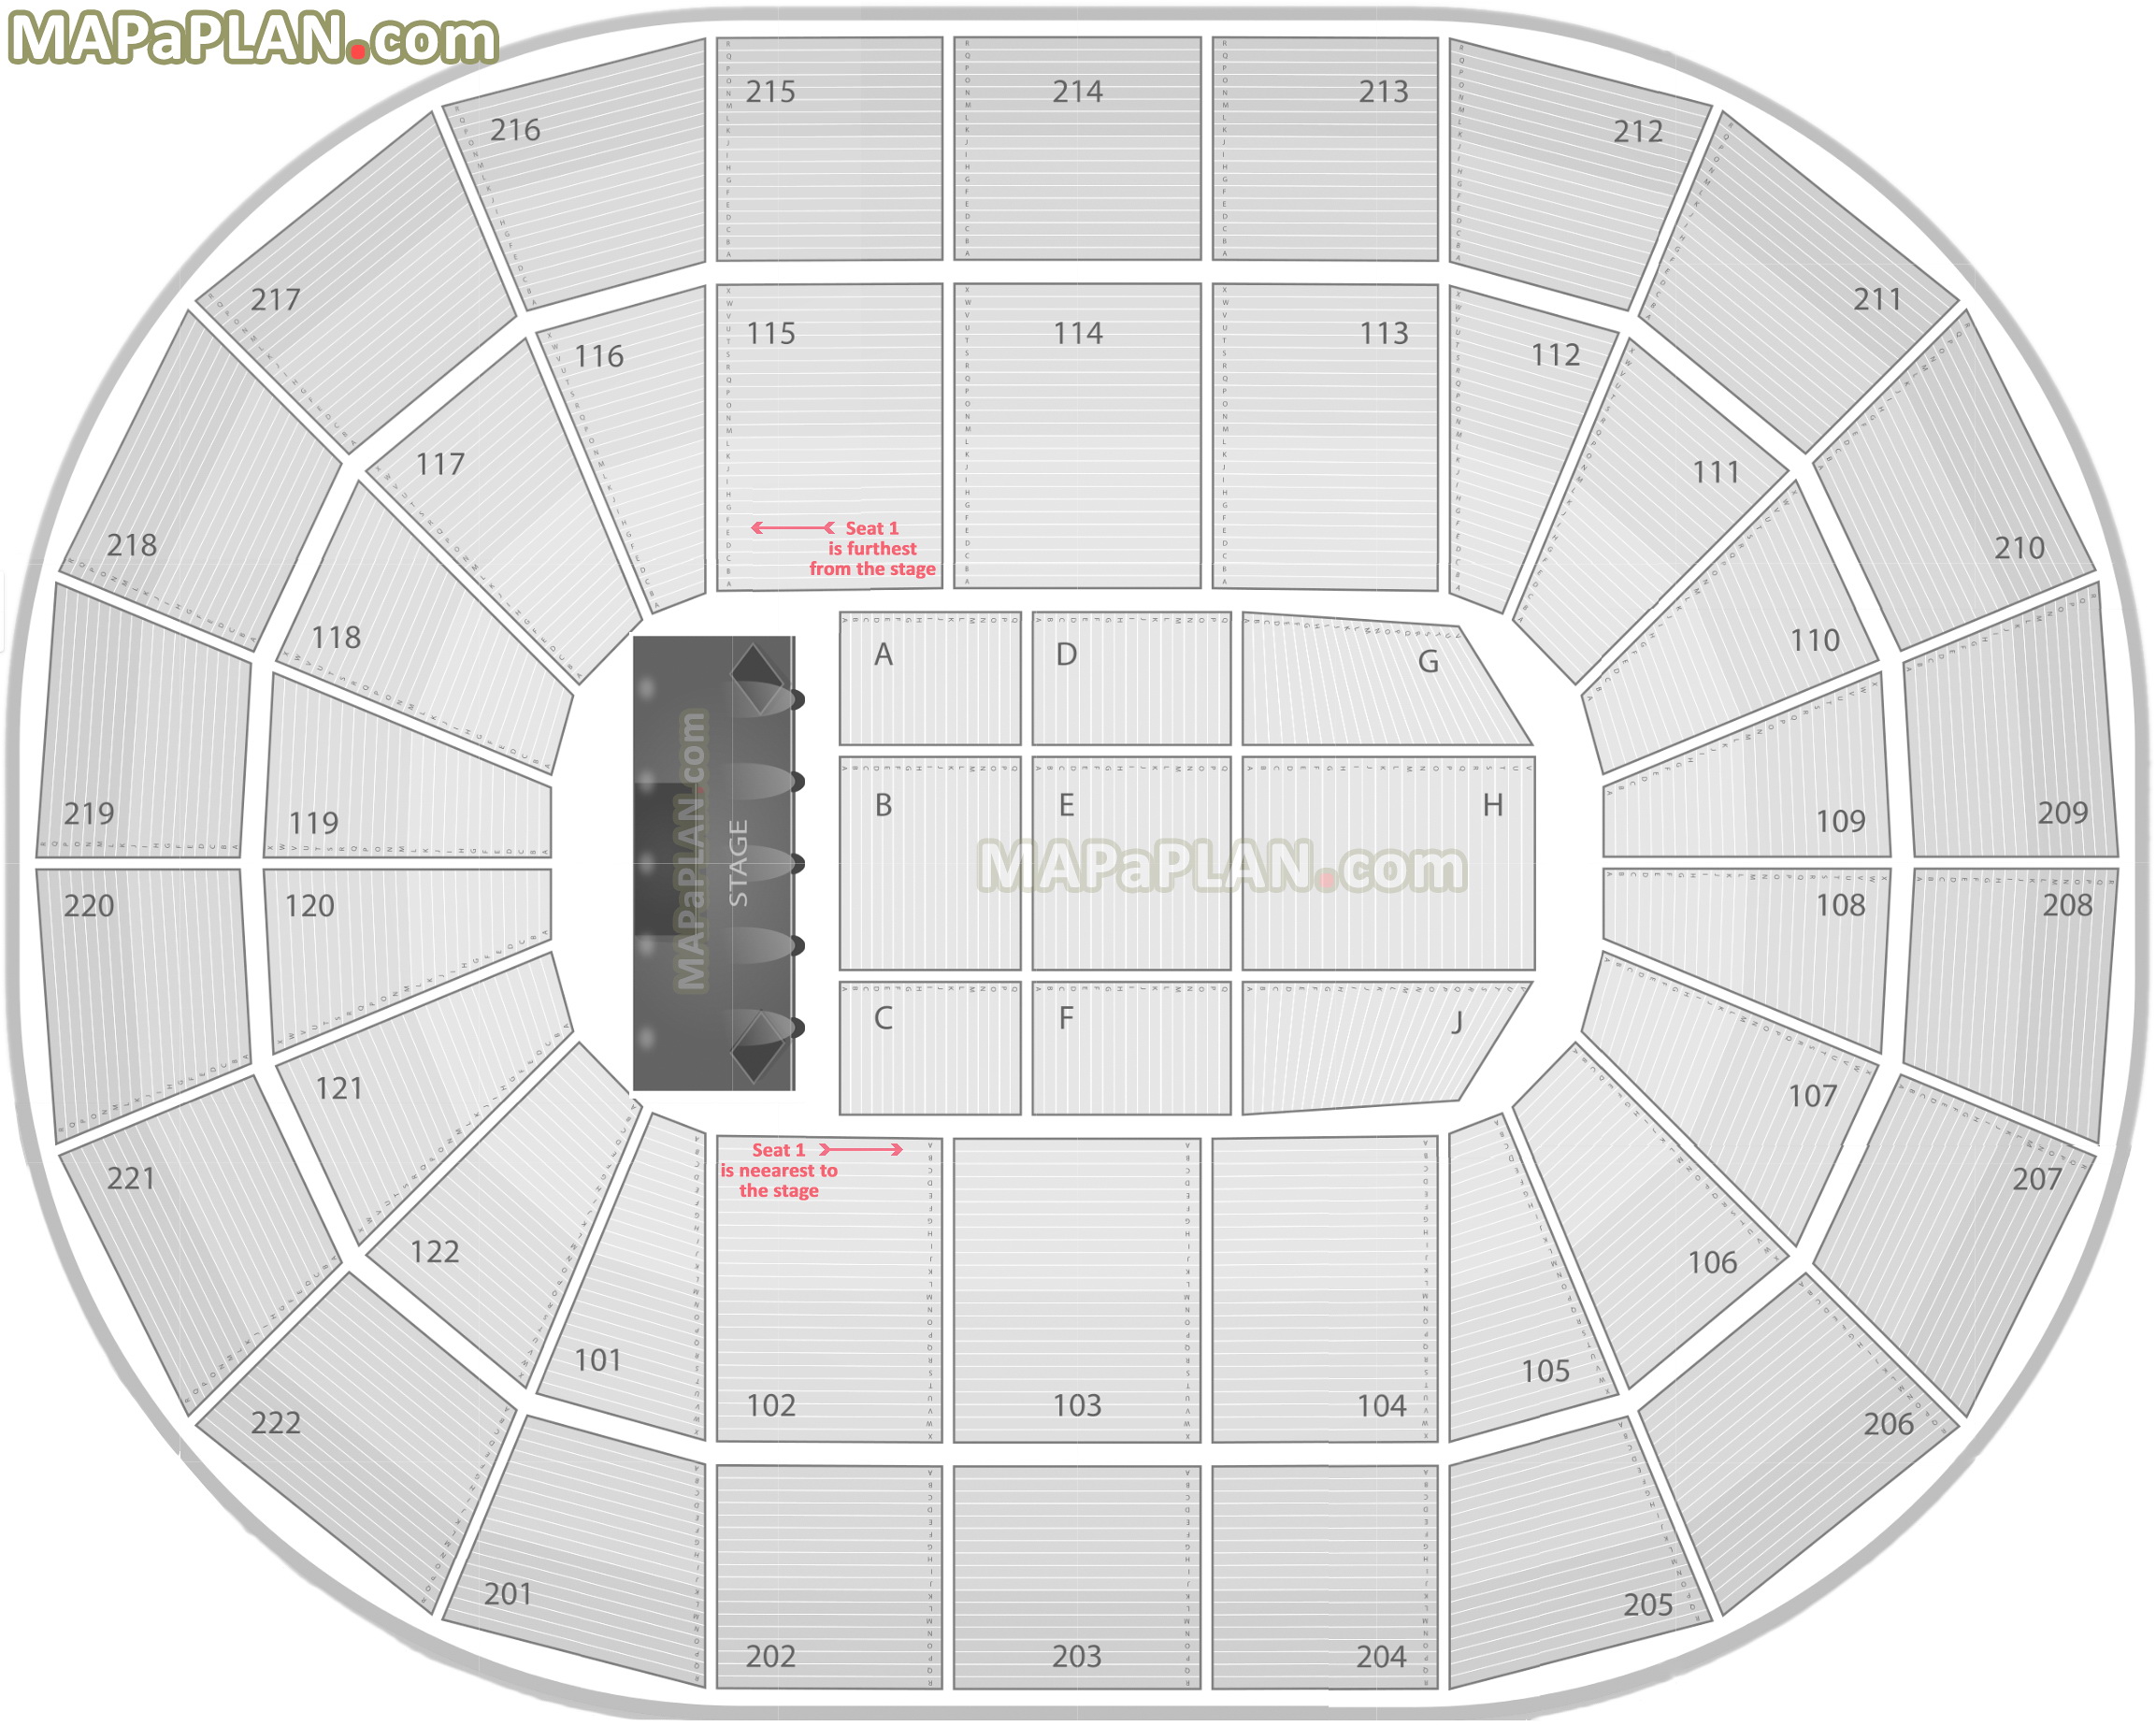 Generic row layout only Manchester AO Arena seating plan